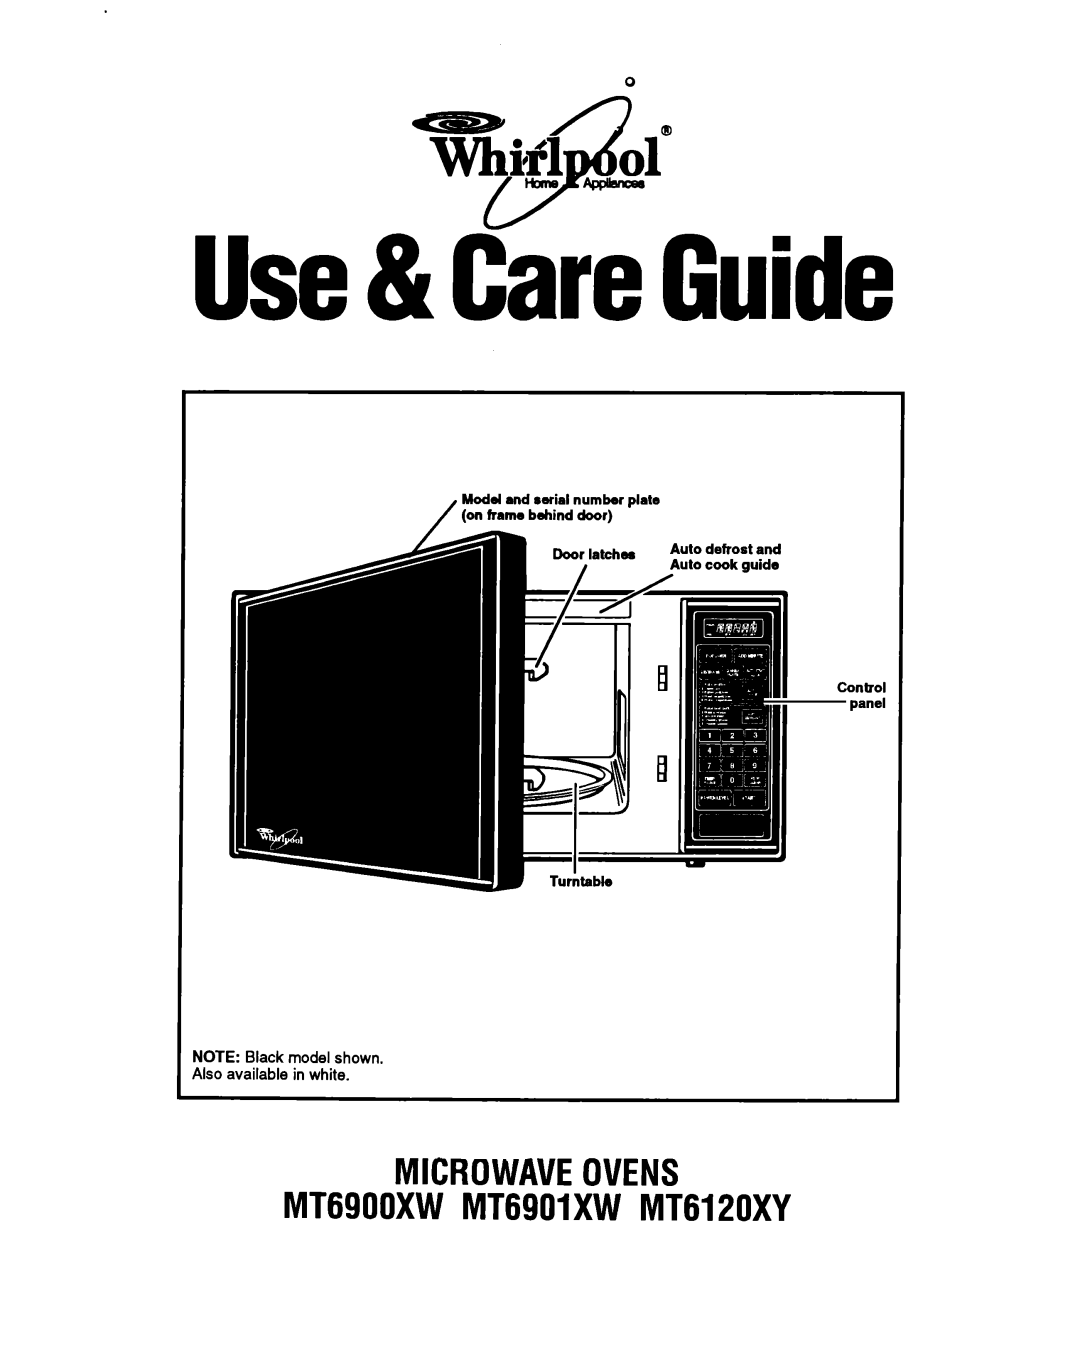 Whirlpool manual MICROWAVEOVENS MT69OOXWMT6901XWMT6120XY, Use& CareGuide 